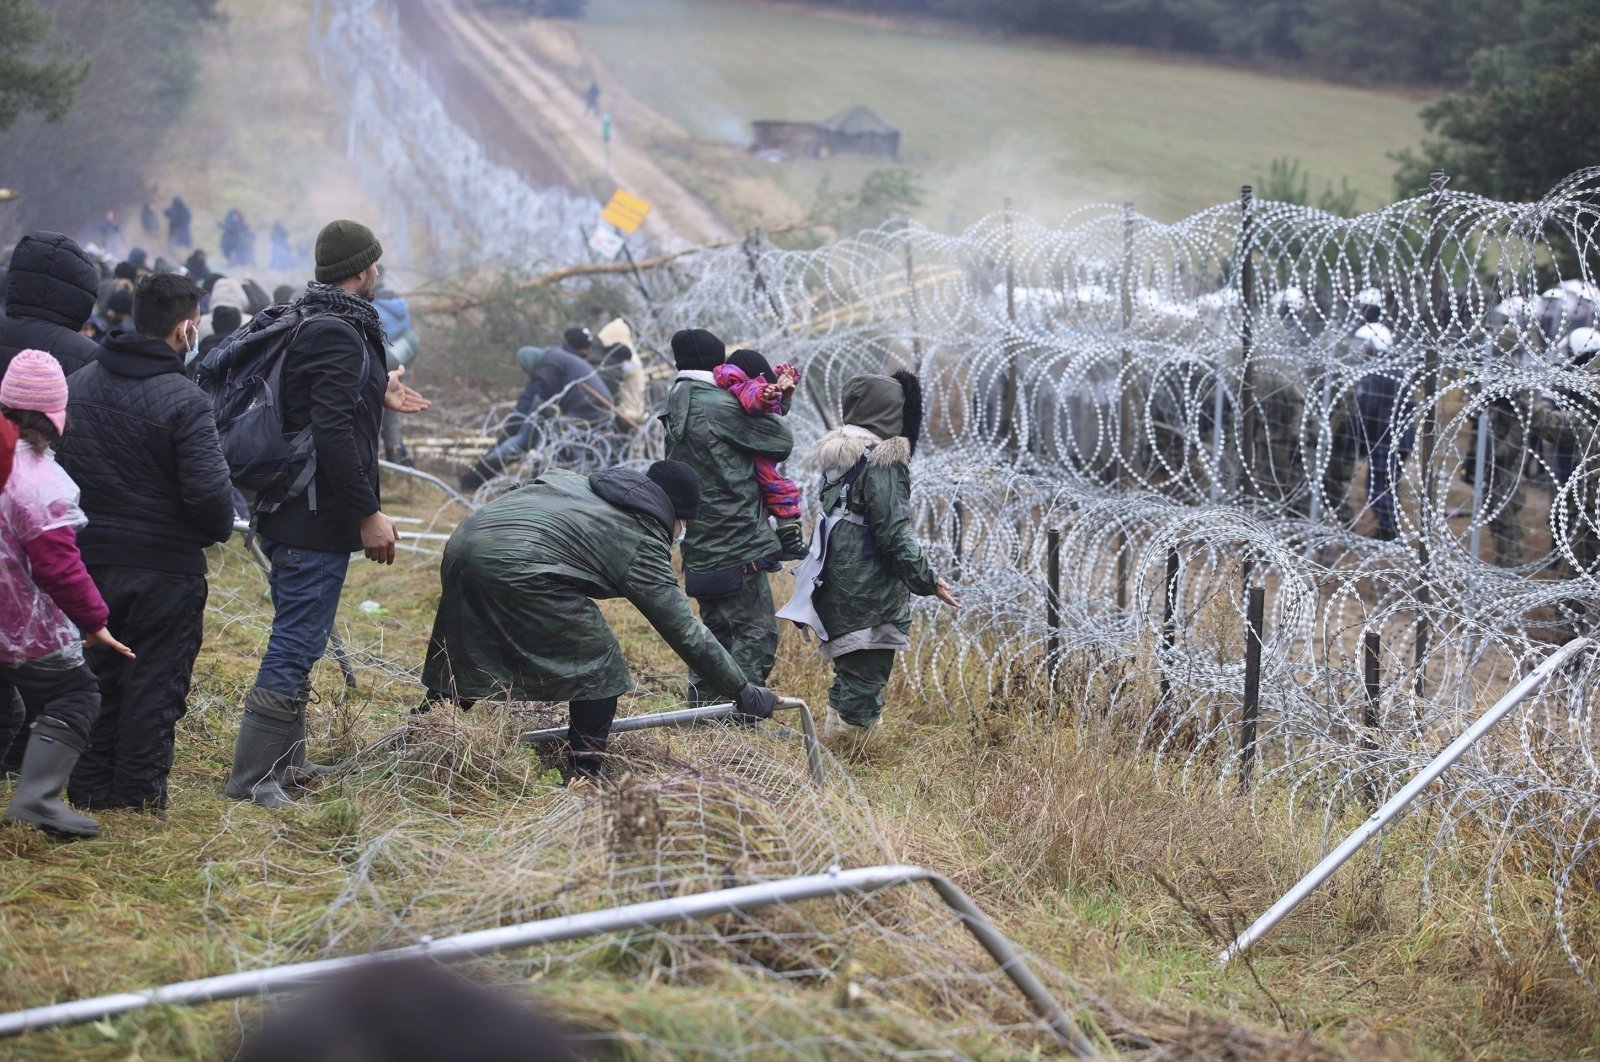 Migrants break down the fence as they gather at the Belarus-Poland border near Grodno, Belarus, Nov. 8, 2021. (AP Photo)